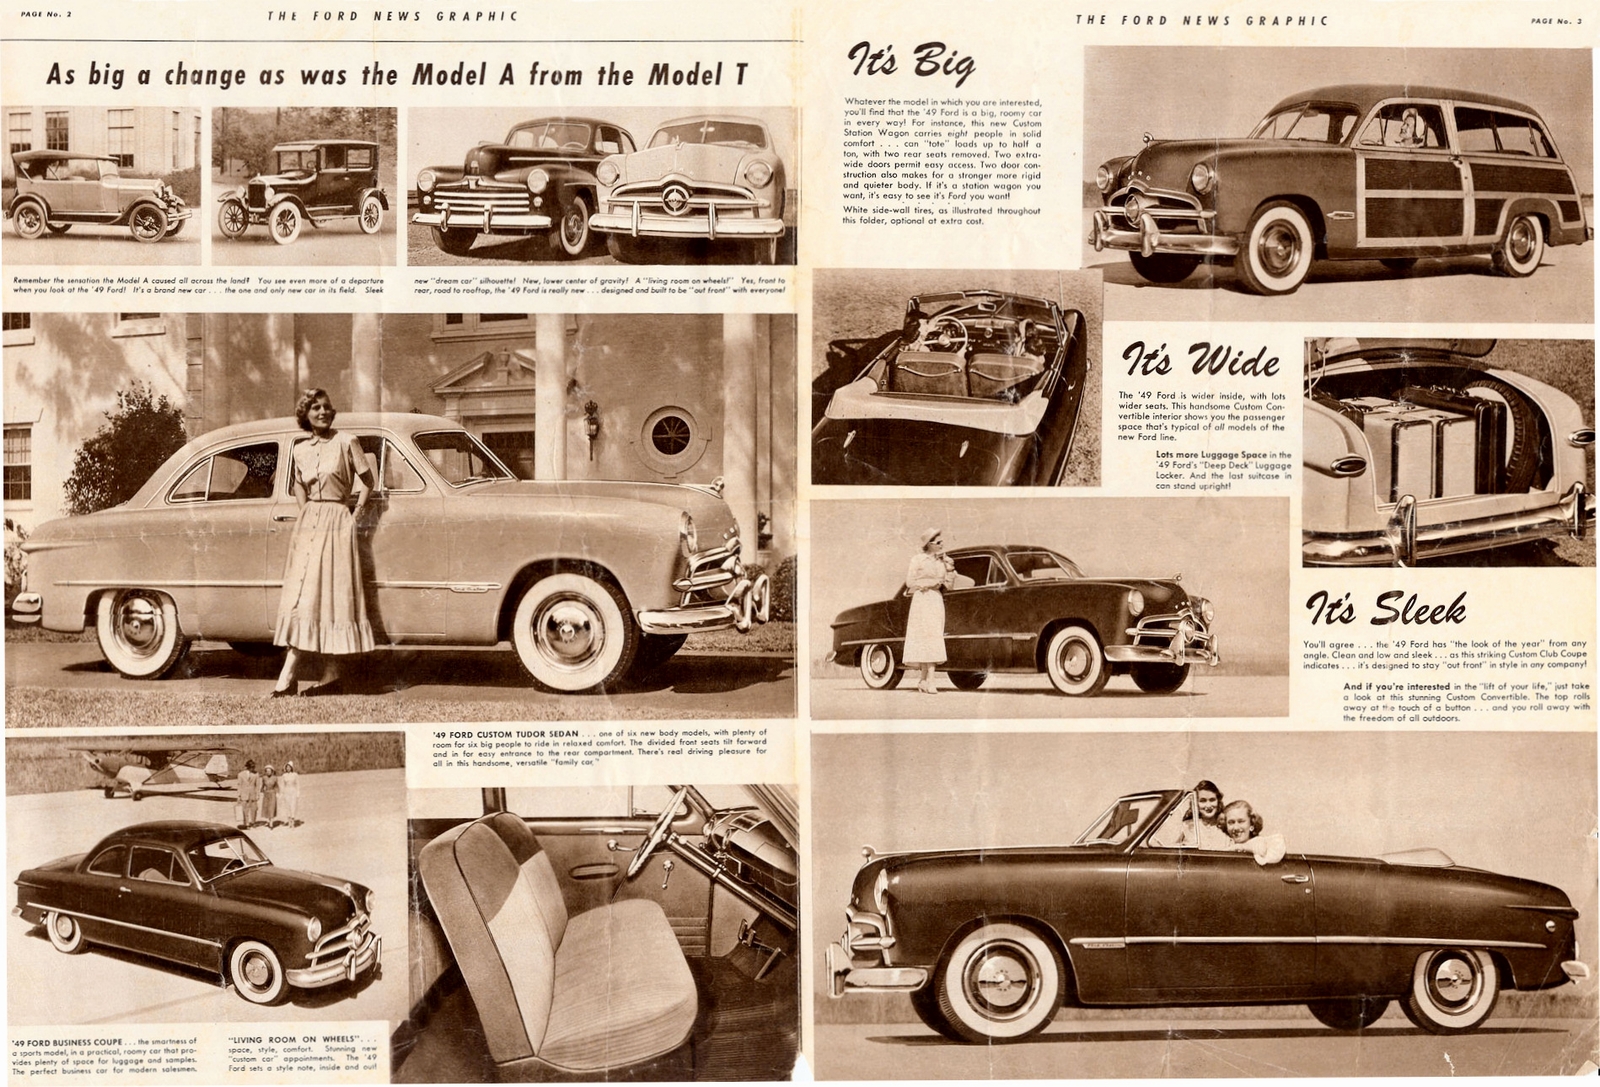 n_1949 Ford News Graphic Foldout-02-03.jpg